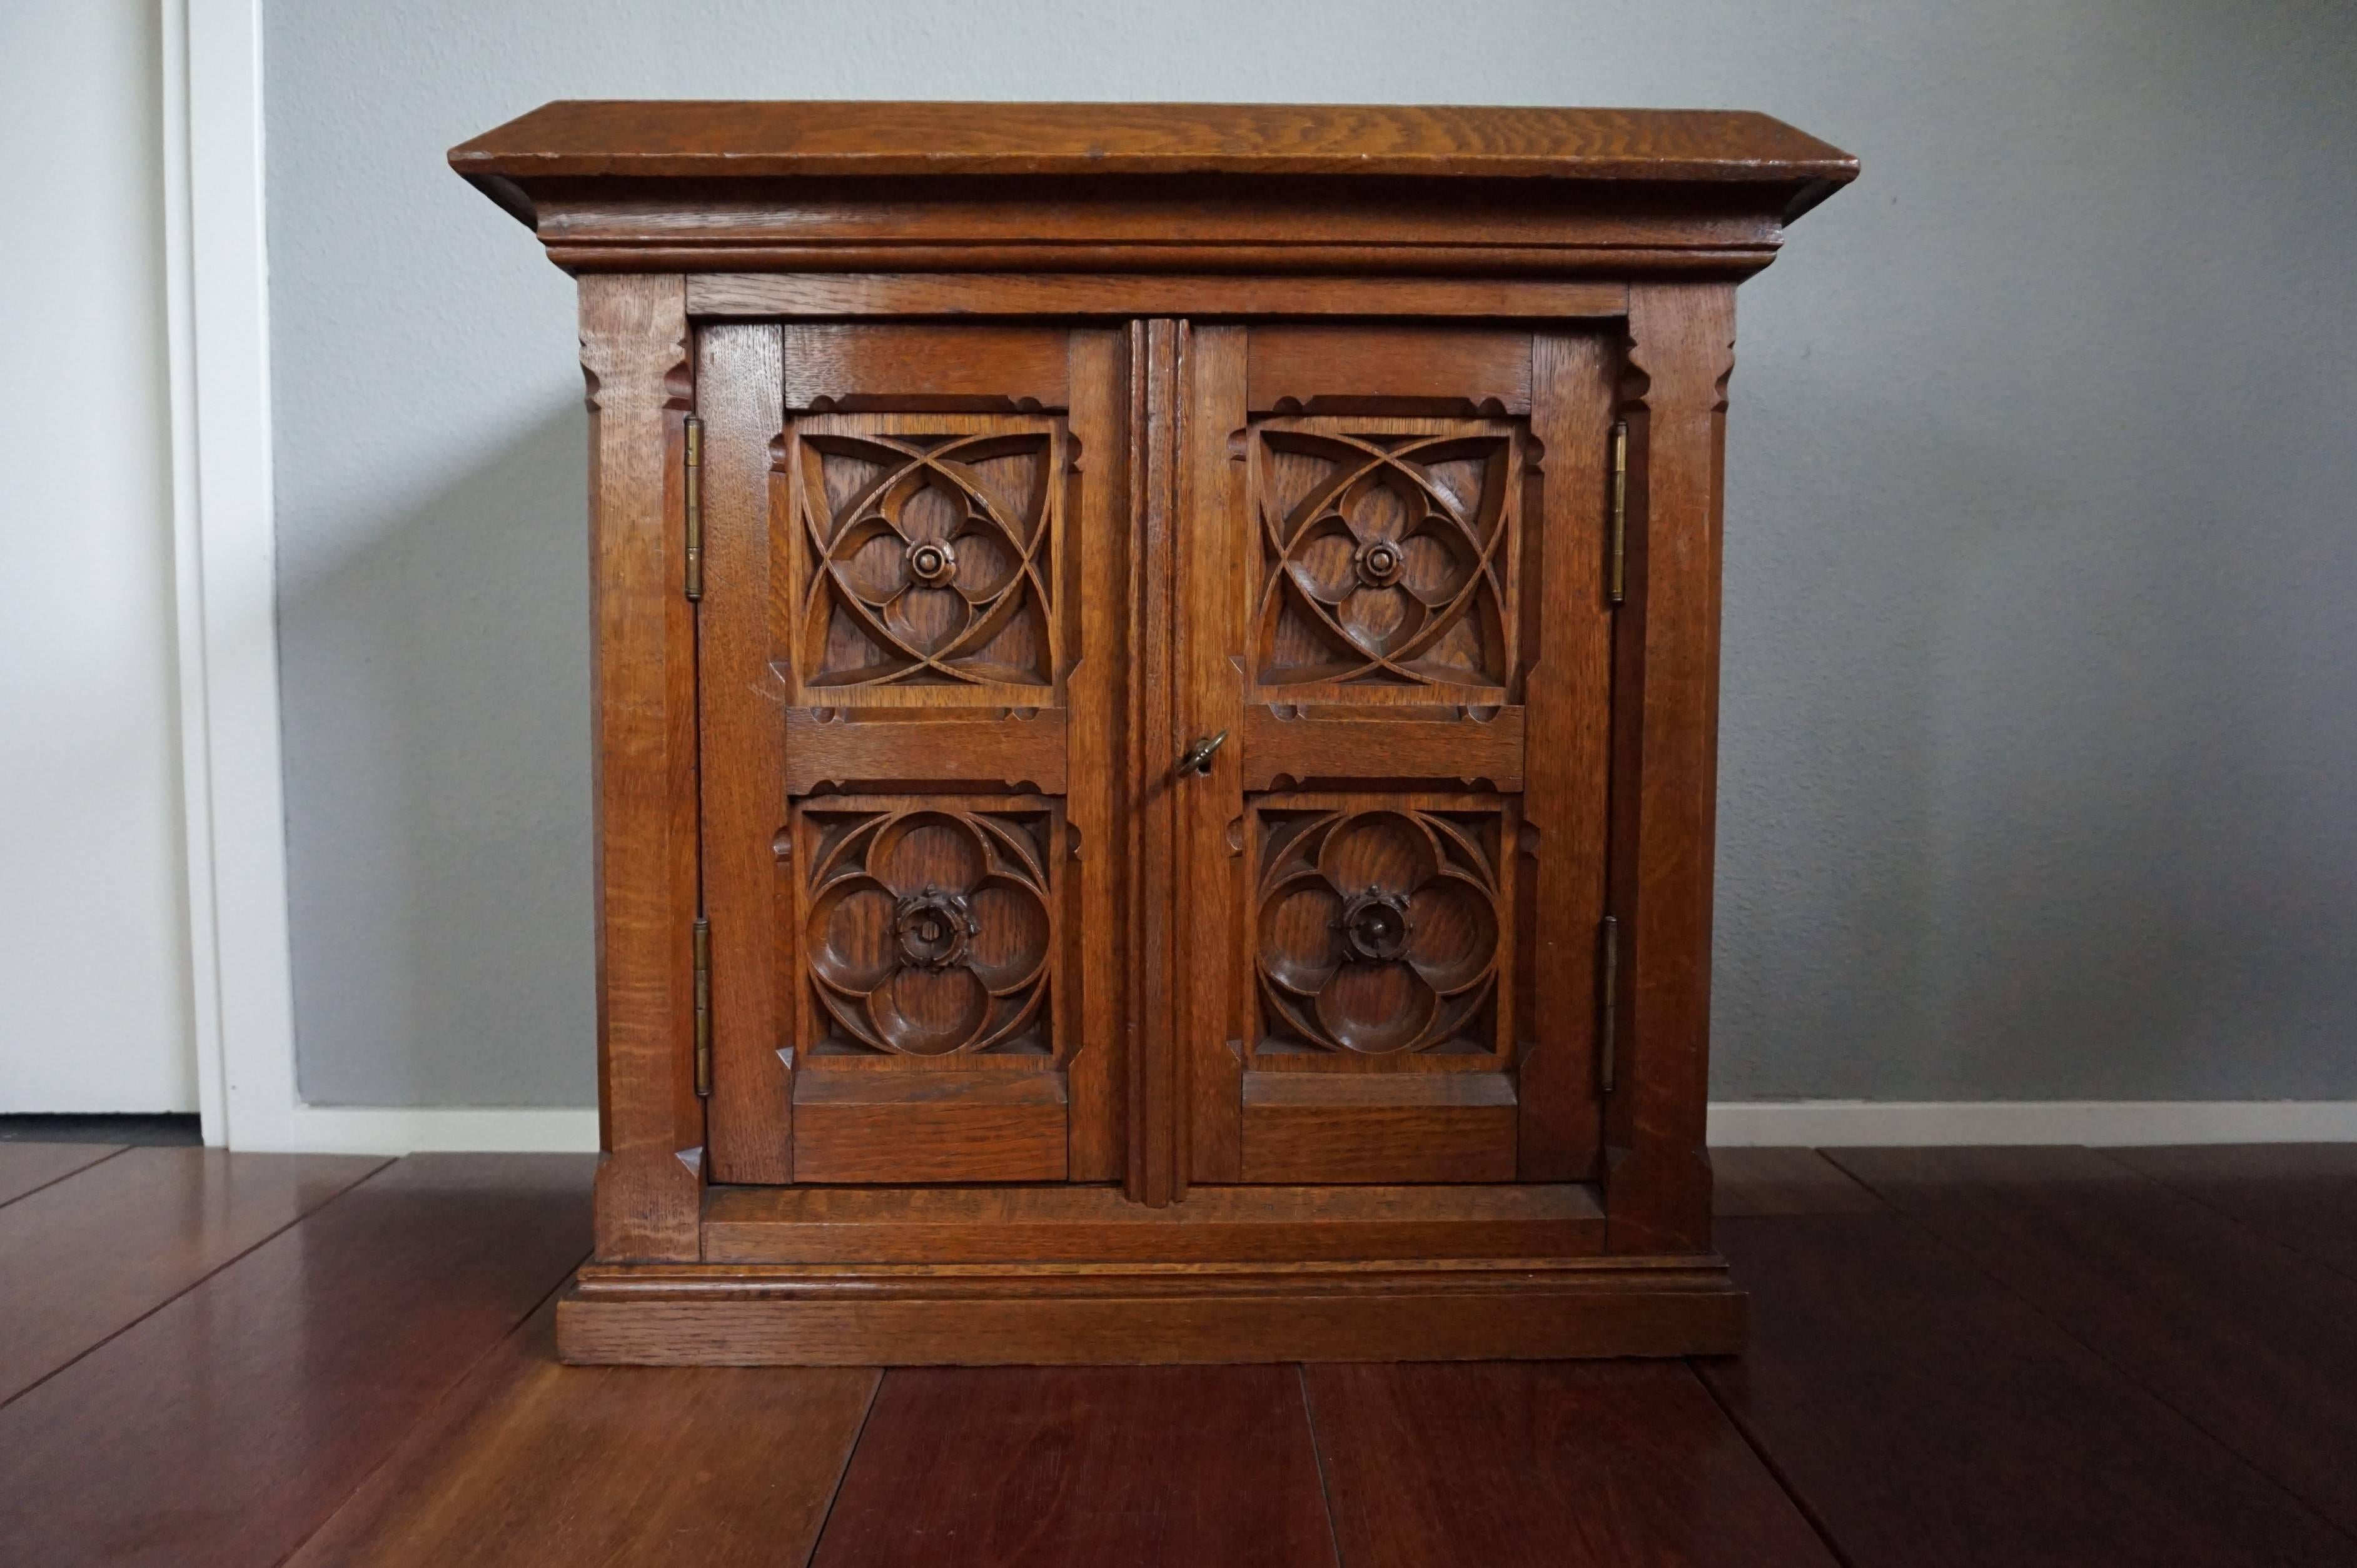 Small but glorious and strong cabinet.

This relatively small, but very well crafted and strong cabinet can be used for all kinds of purposes. It dates from the earliest days of twentieth century, it is unmistakably Gothic Revival in design, it has